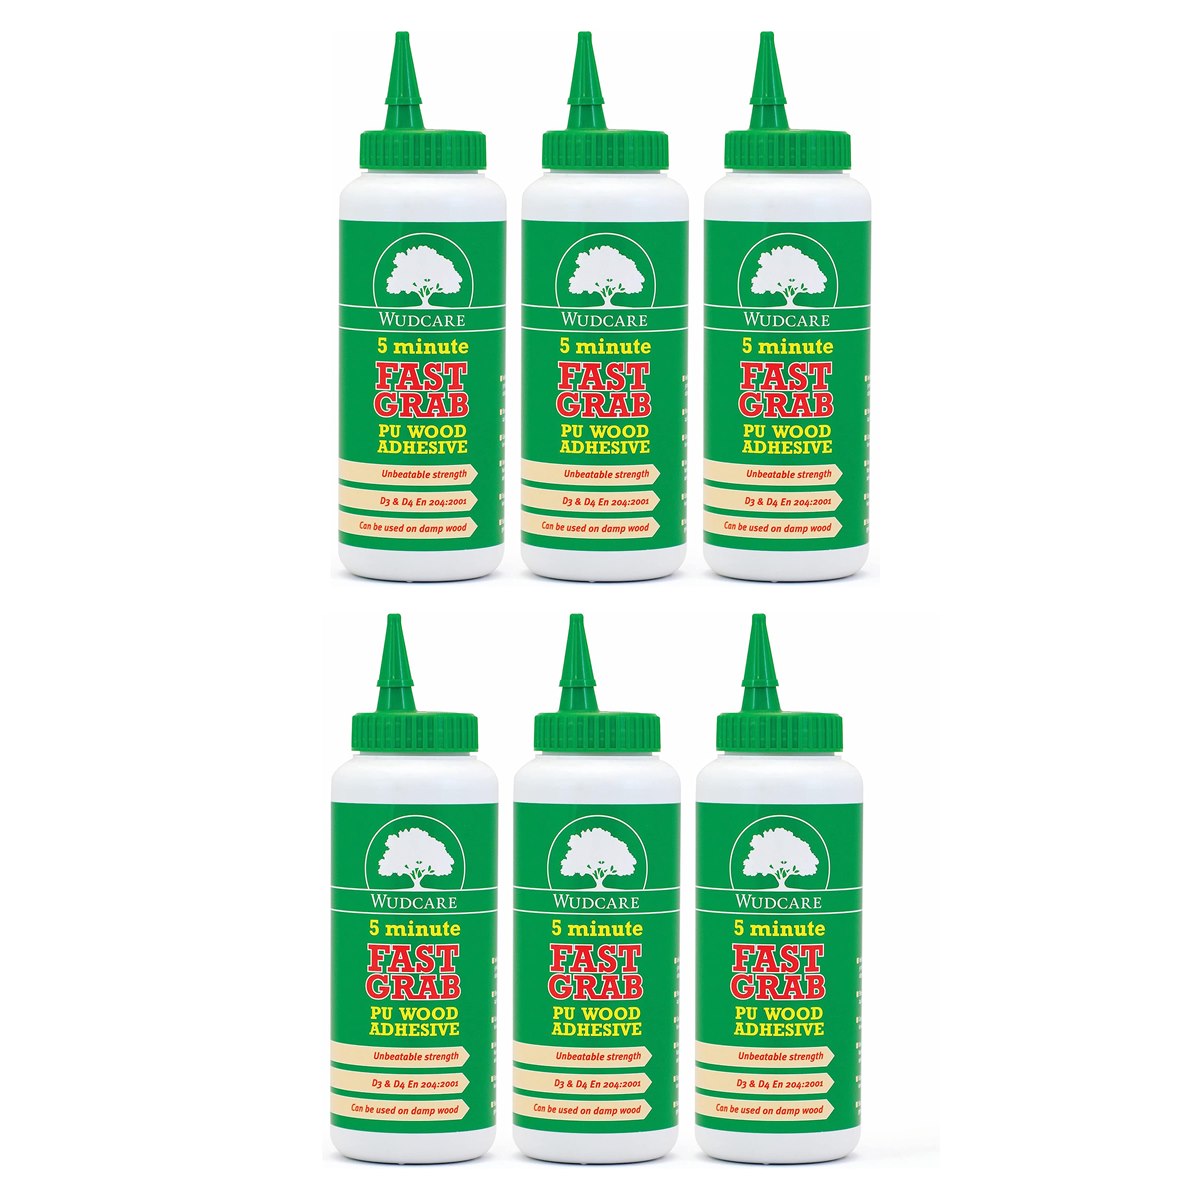 Case of 6 x Wudcare 5 Minute Fast Grab PU Wood Adhesive 1 kg